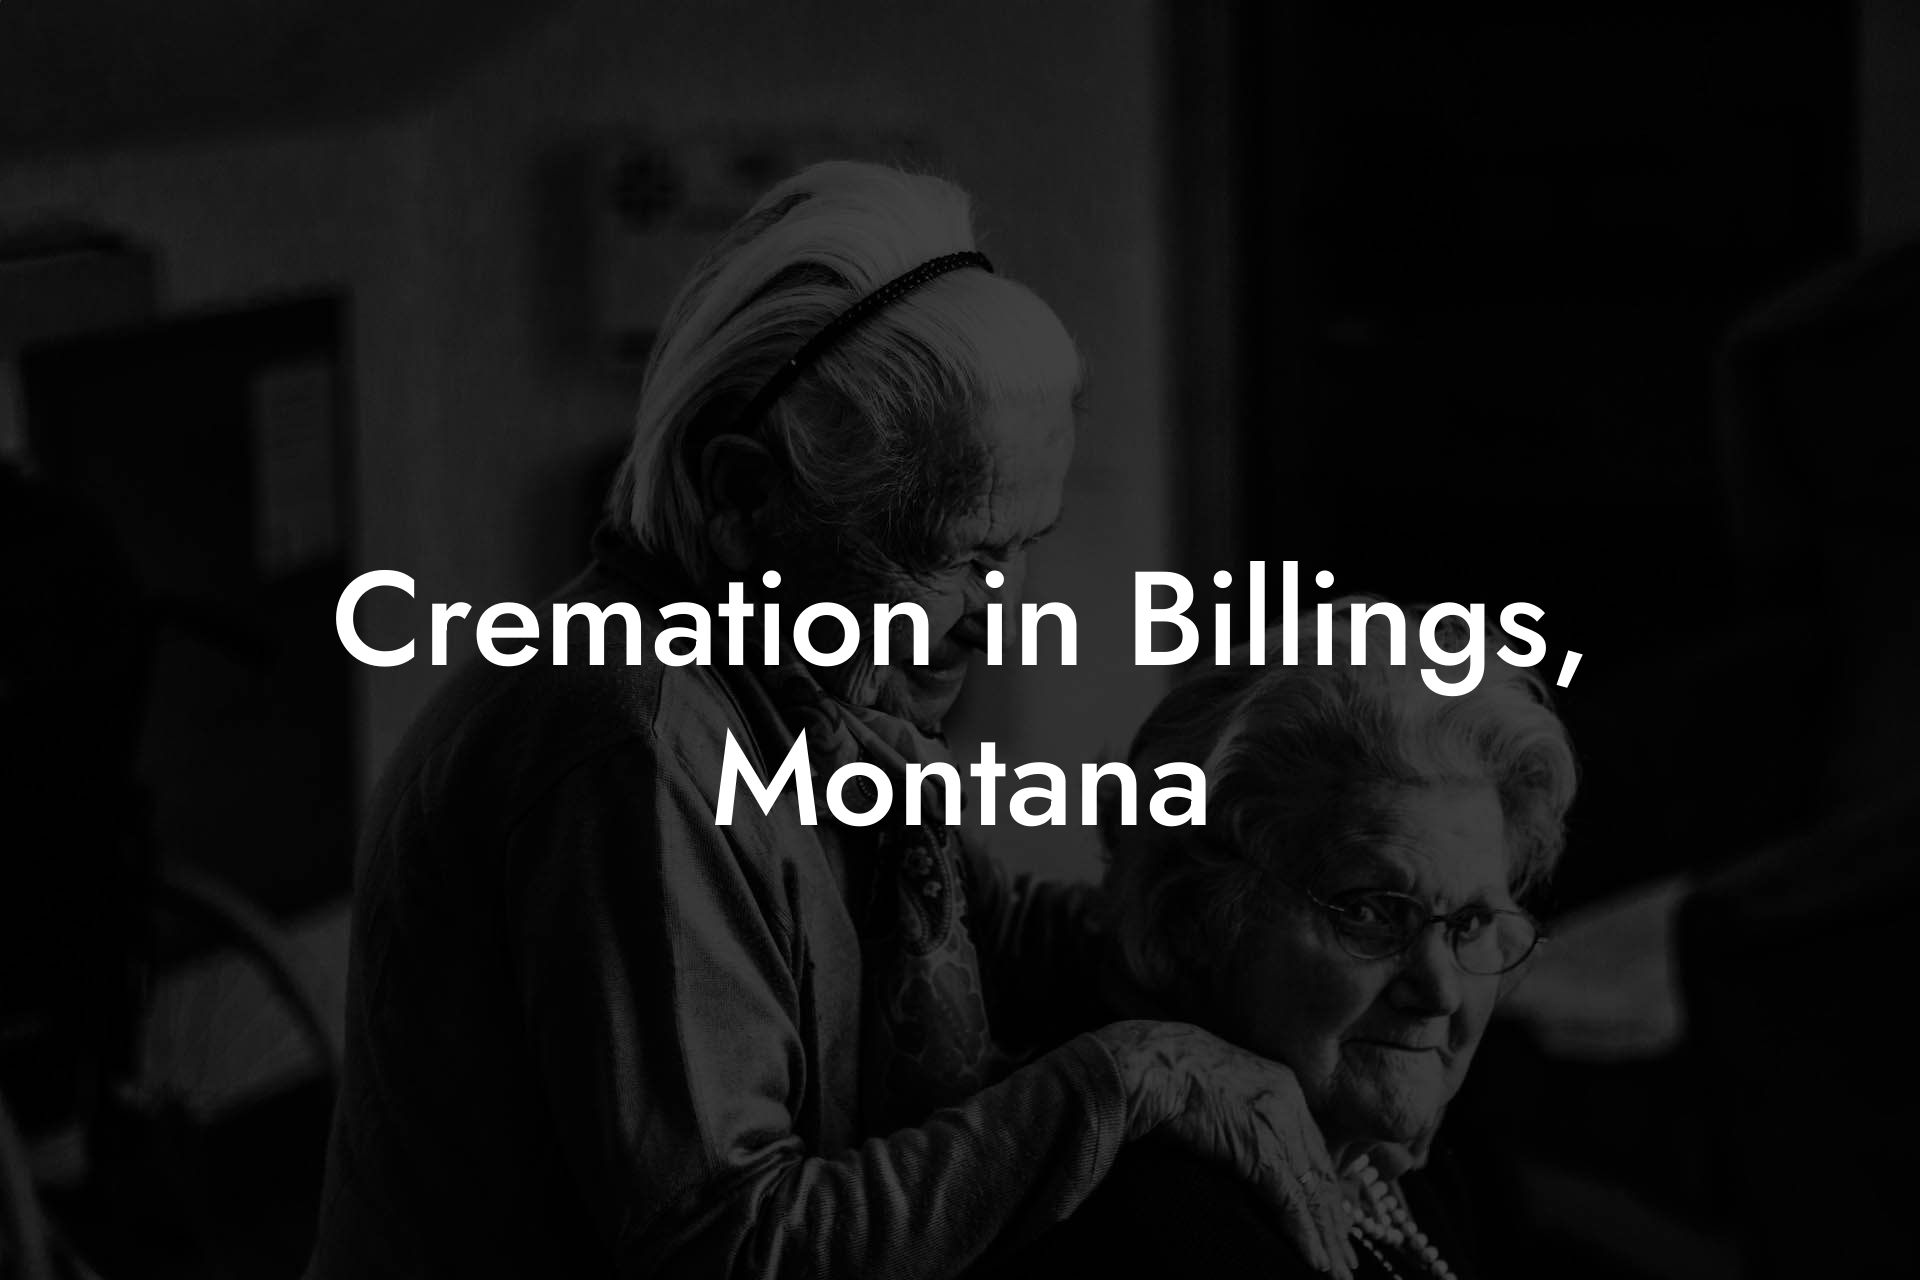 Cremation in Billings, Montana